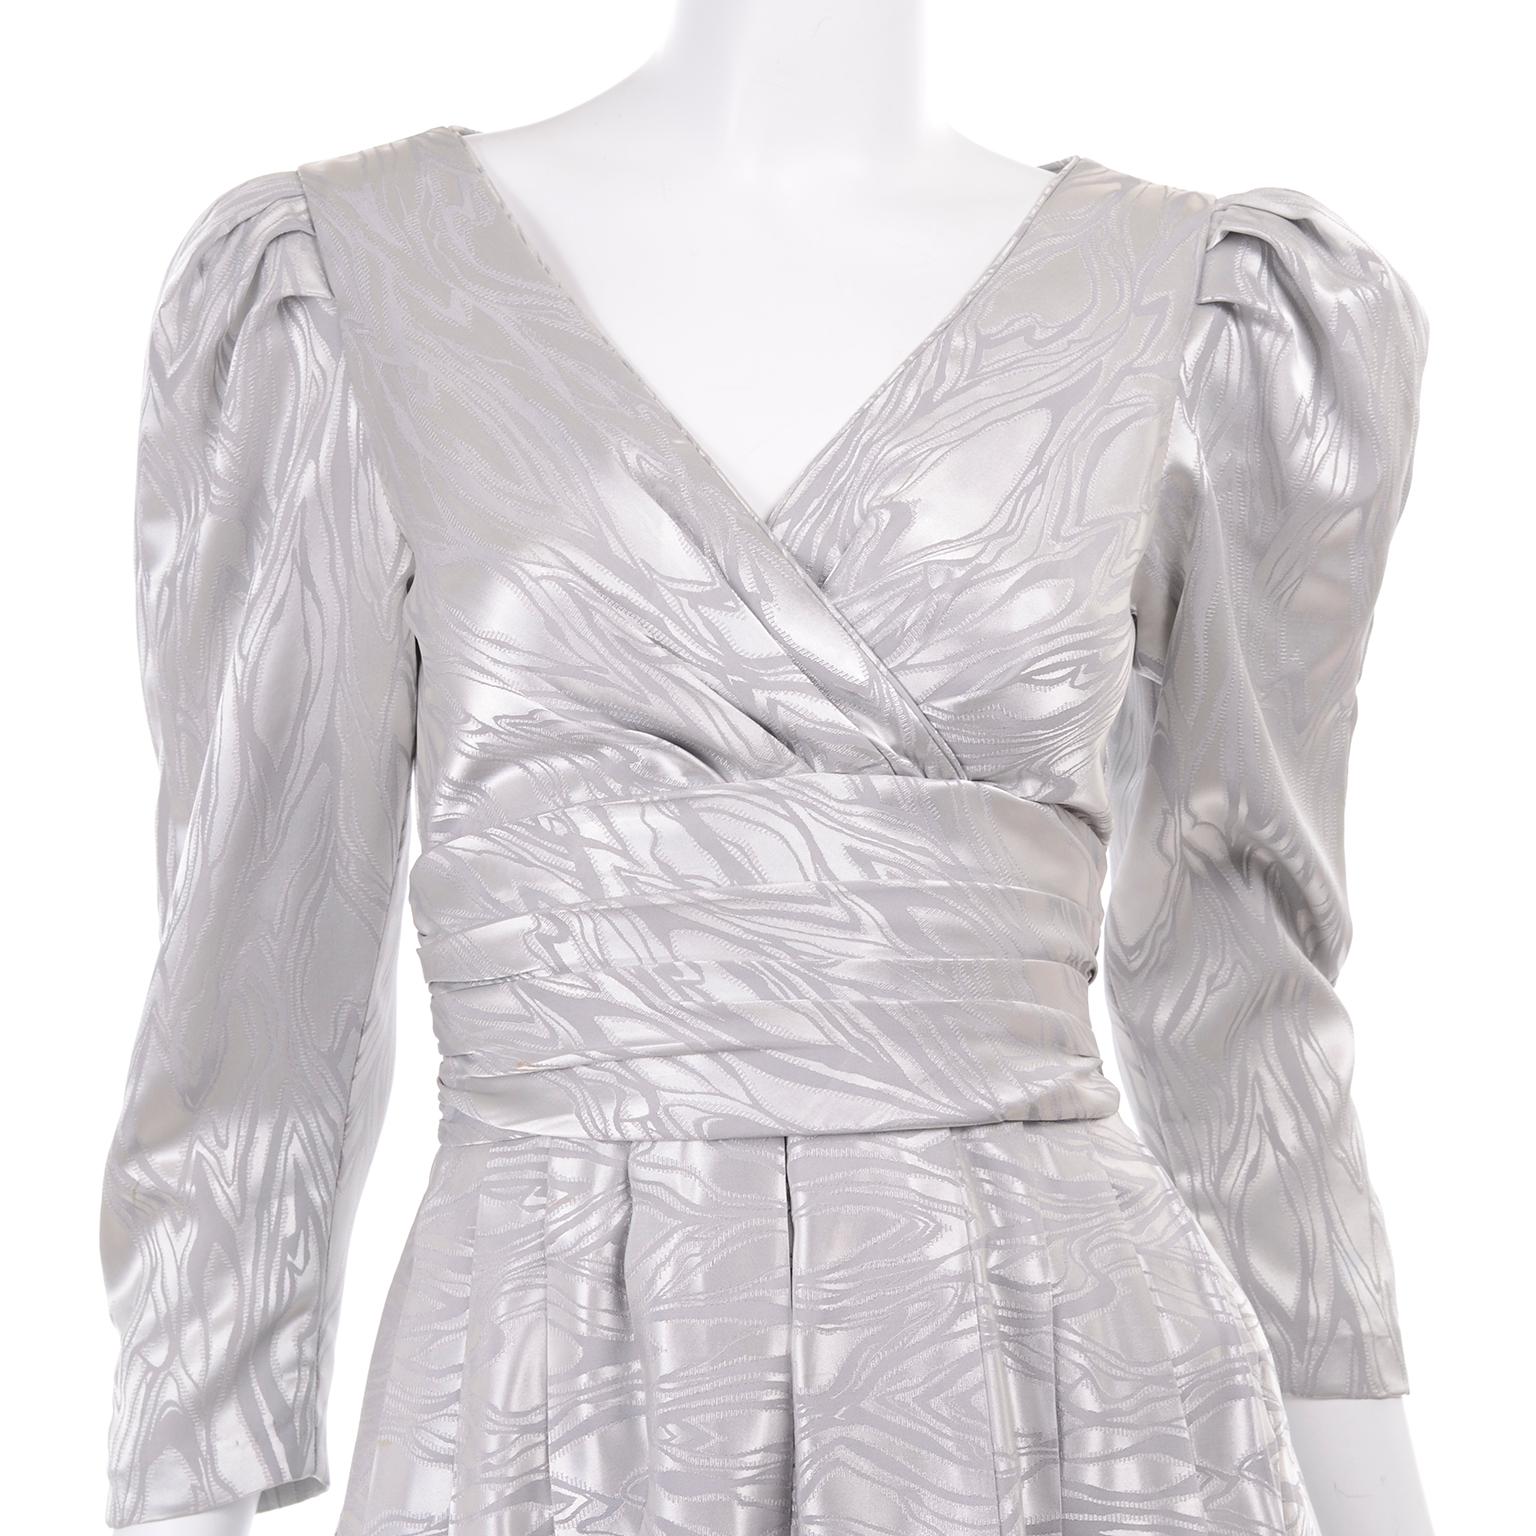 1980s A J Bari Vintage Silver Evening Dress w Puffed Gathered Sleeves & Pockets For Sale 4